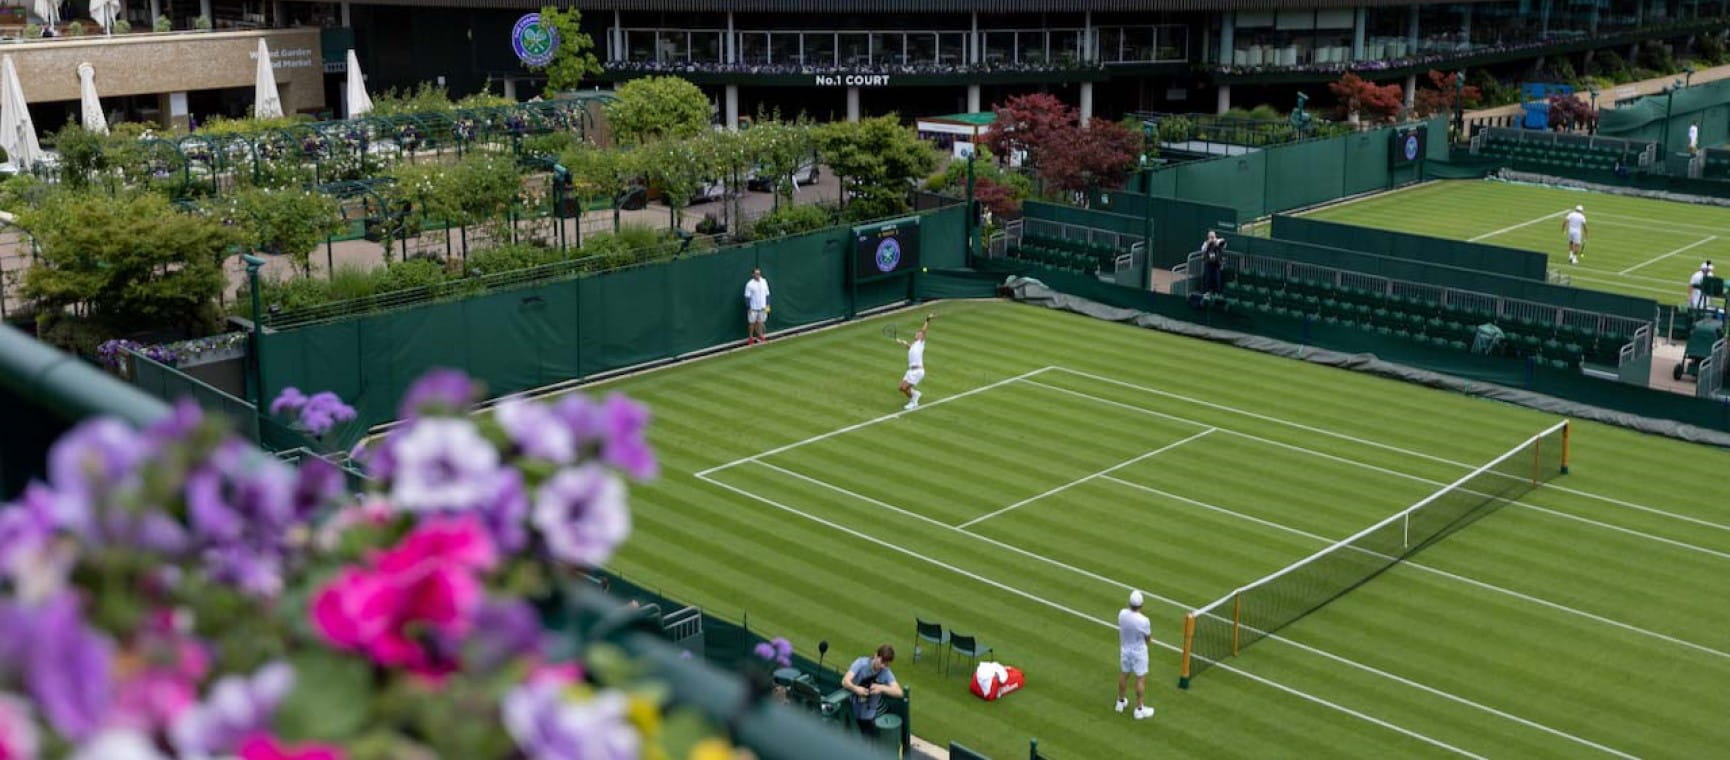 Players practice on the outside courts at The Championships 2022. Held at The All England Lawn Tennis Club, Wimbledon. Day -3 Friday 24/06/2022. Credit: AELTC/Jed Jacobsohn.